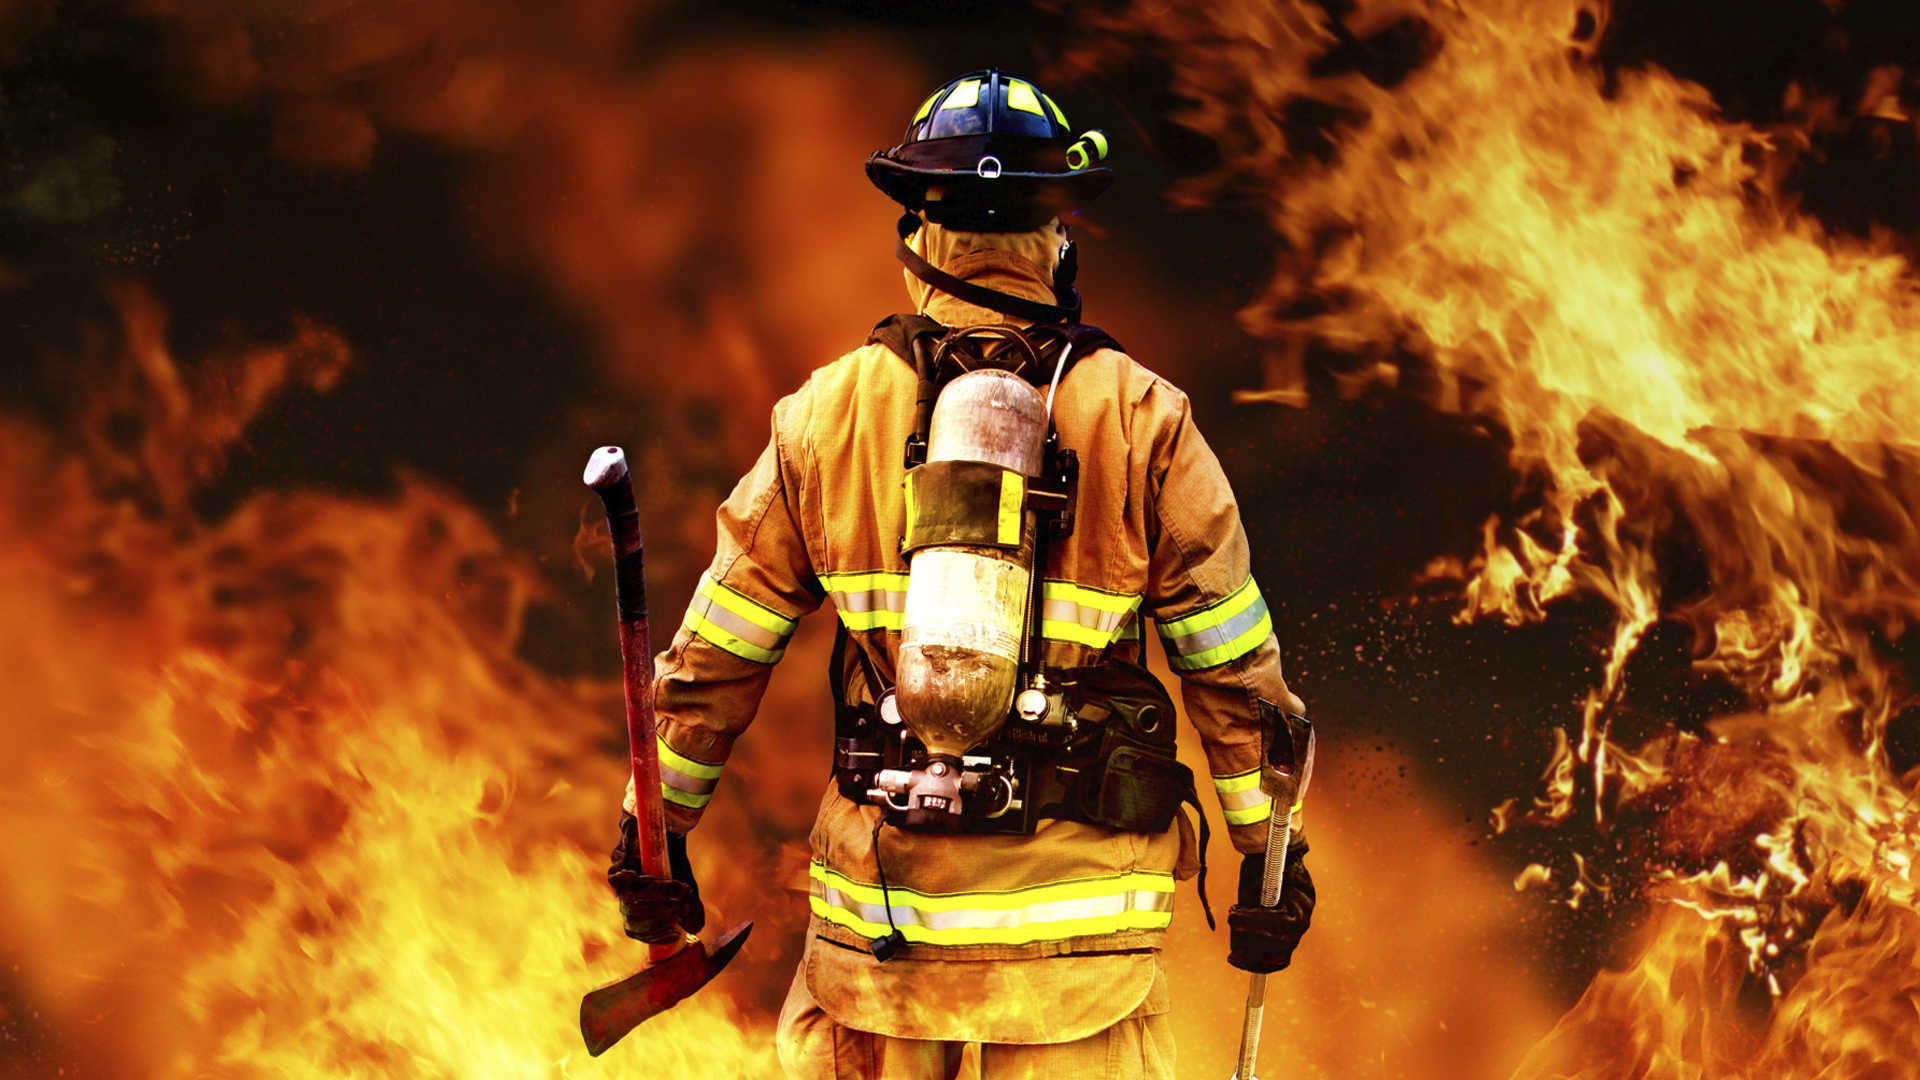 1920x1080 Firefighter Wallpapers For Computer - Wallpaper Cave ... 